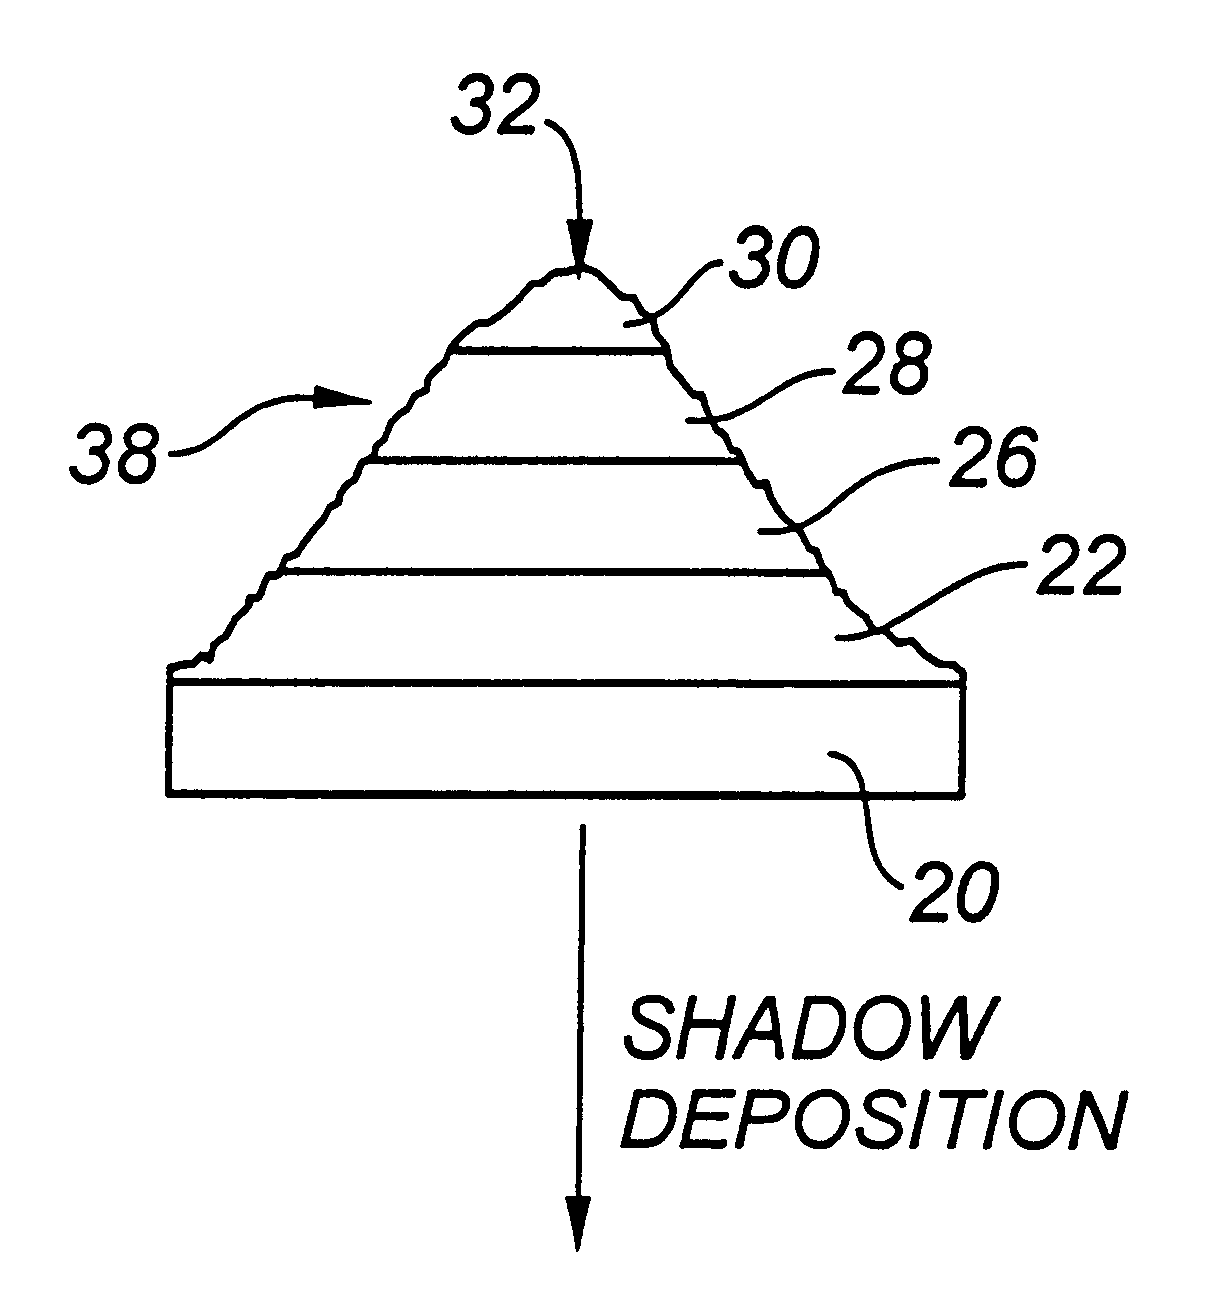 Process for production of actively sterile surfaces